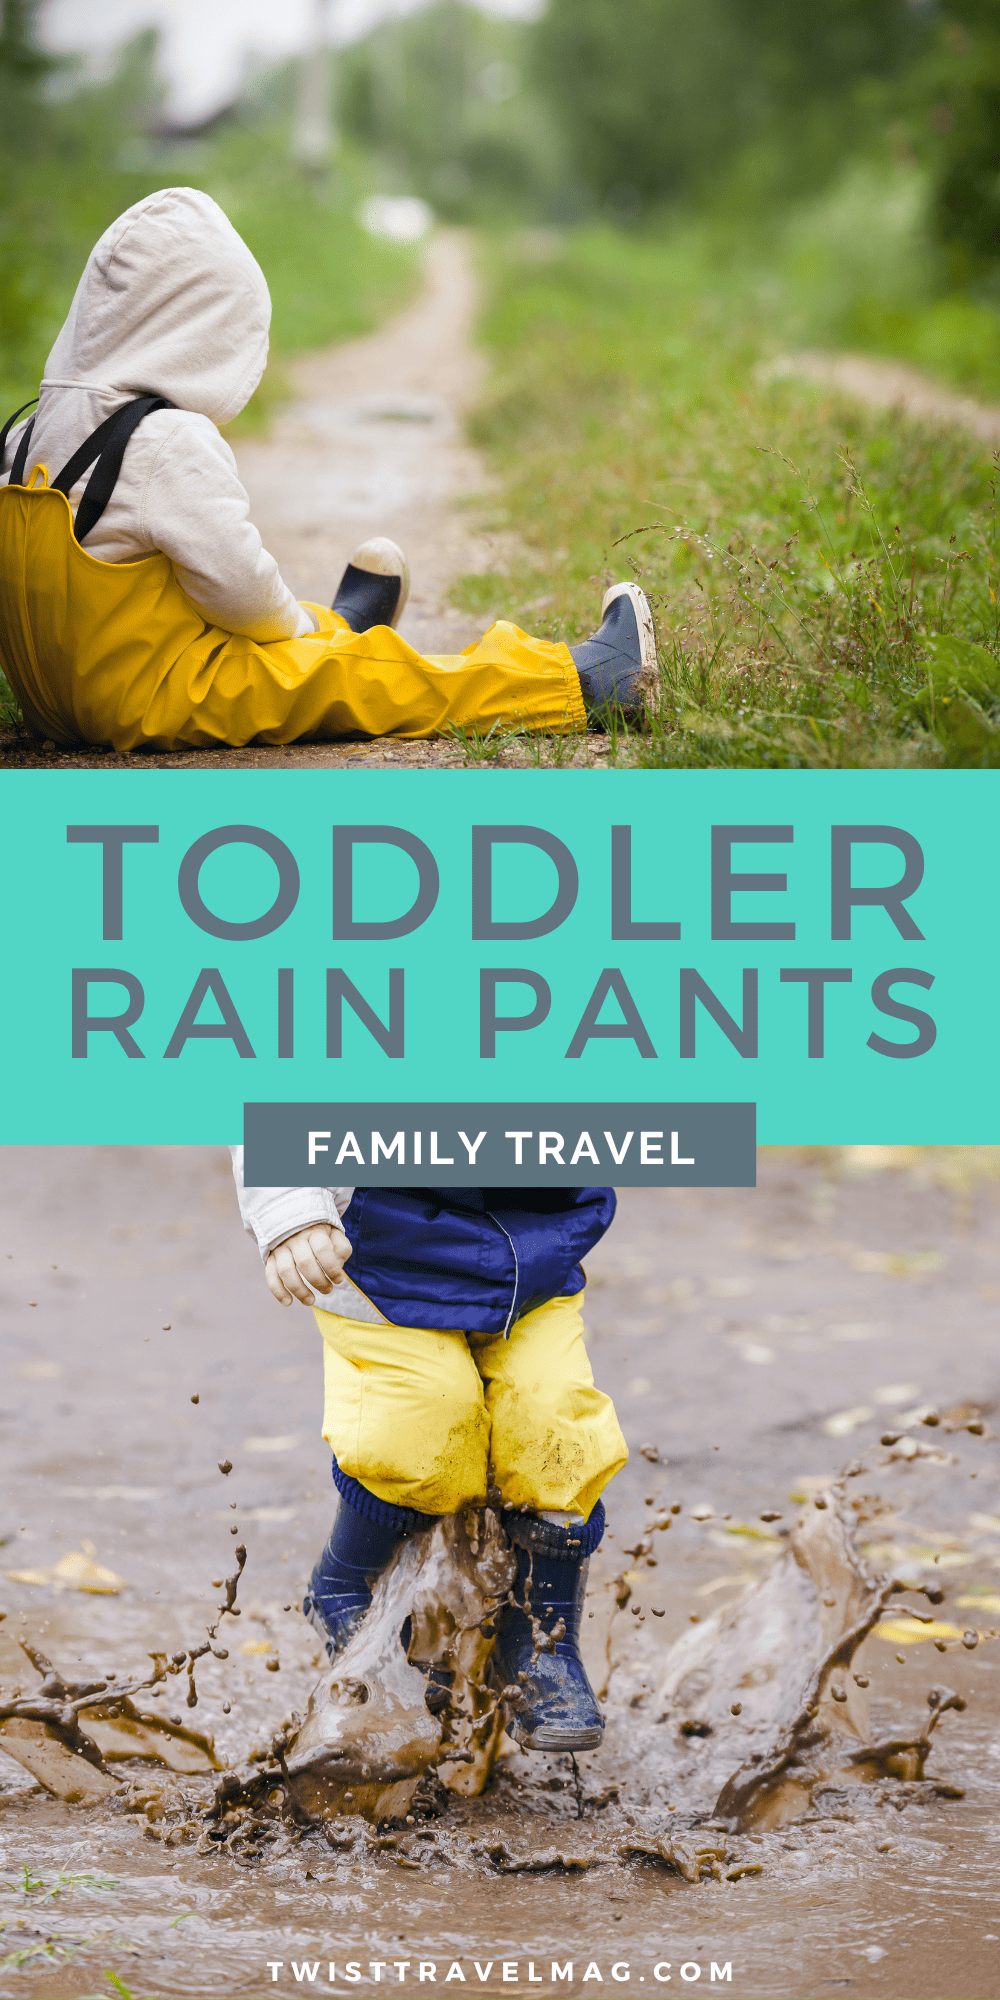 How to find the perfect toddler rain pants